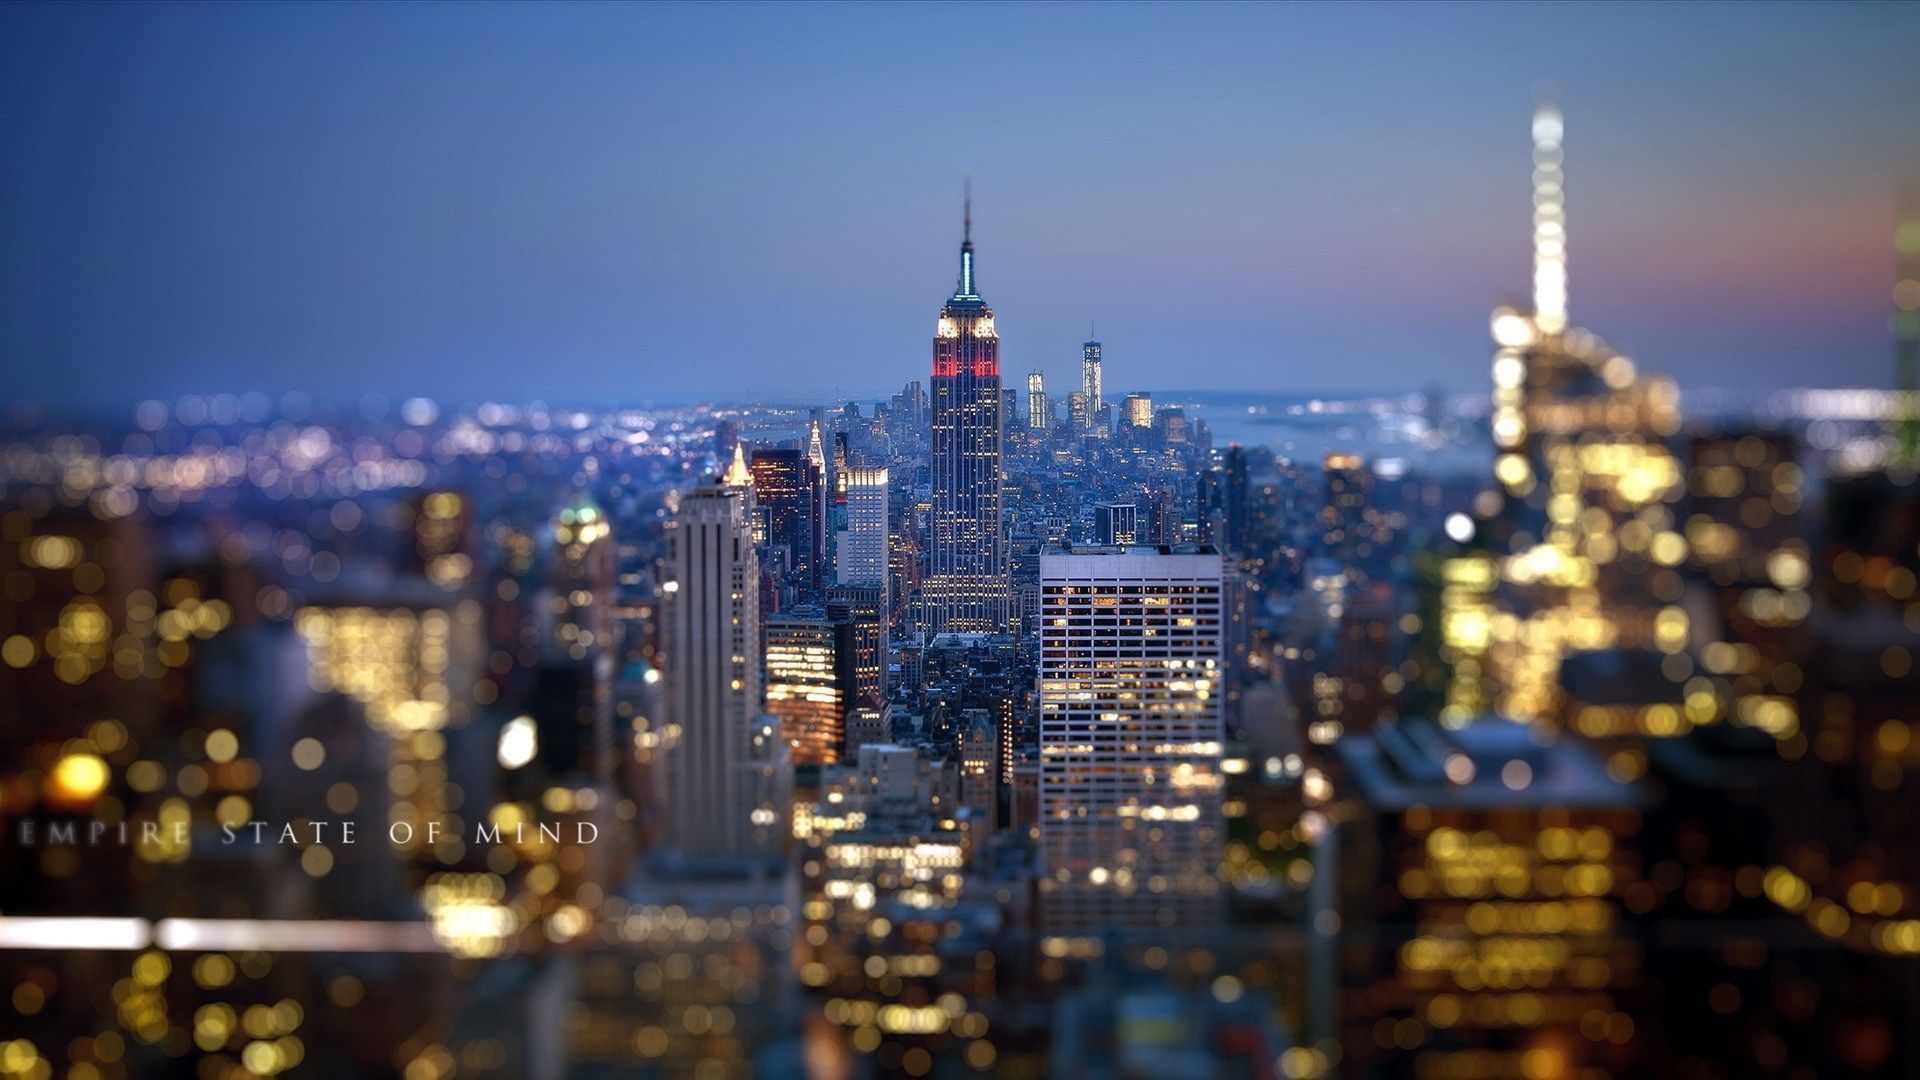 Empire State New York City HD Wallpaper - WallpapersMe